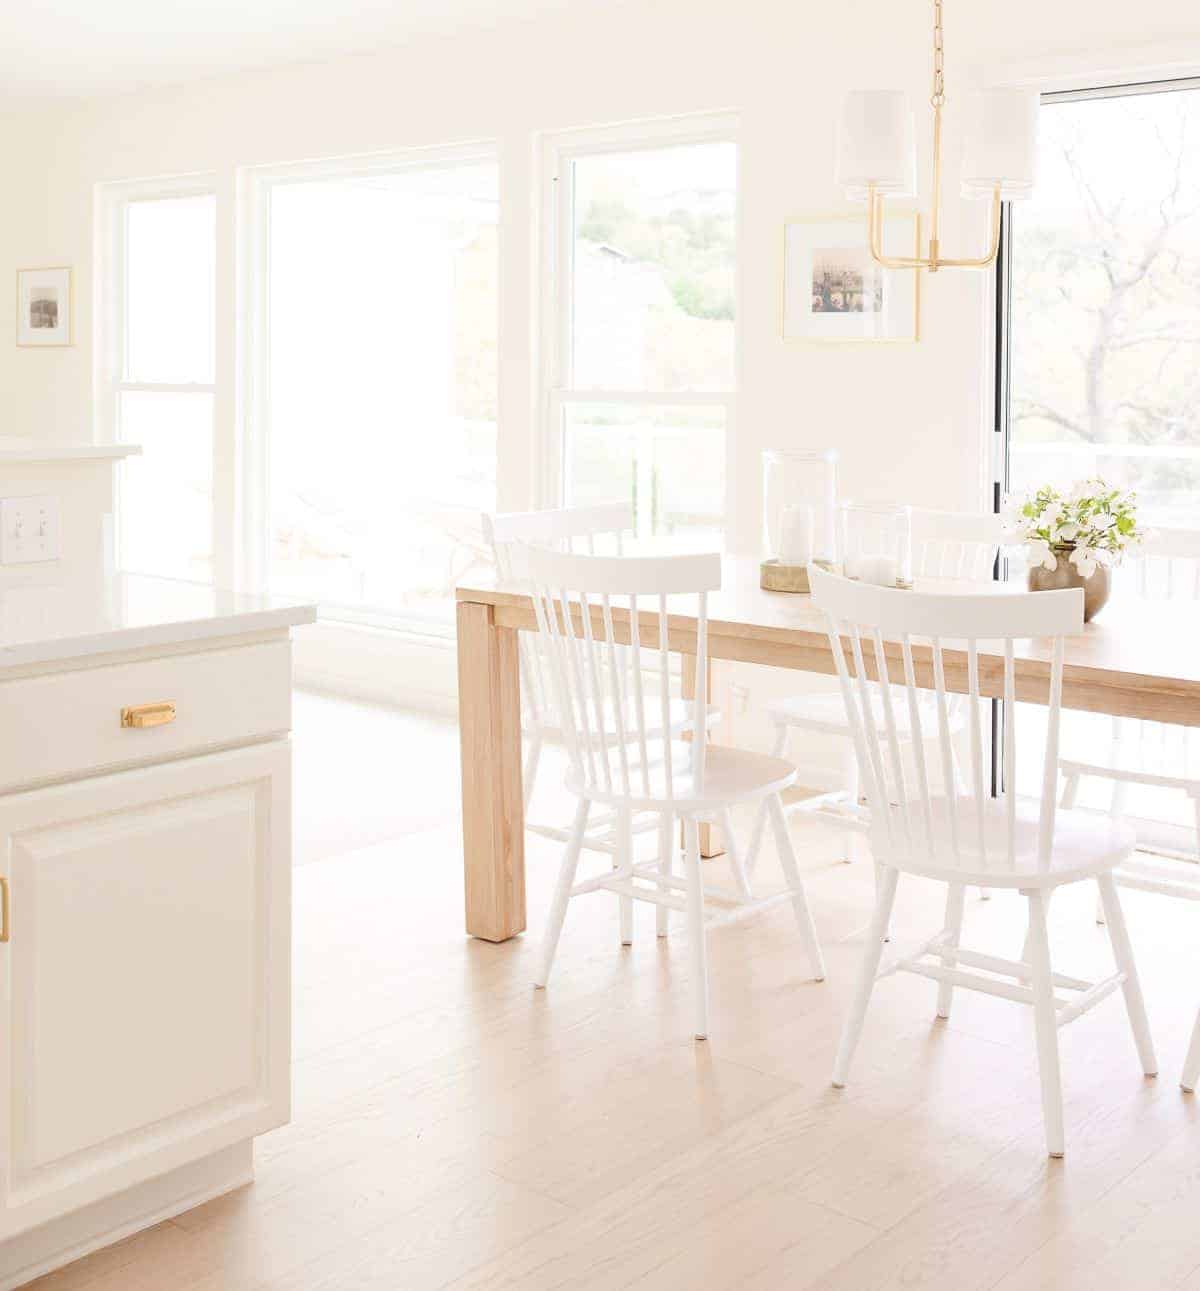 A white kitchen dining area with wide white oak floors.